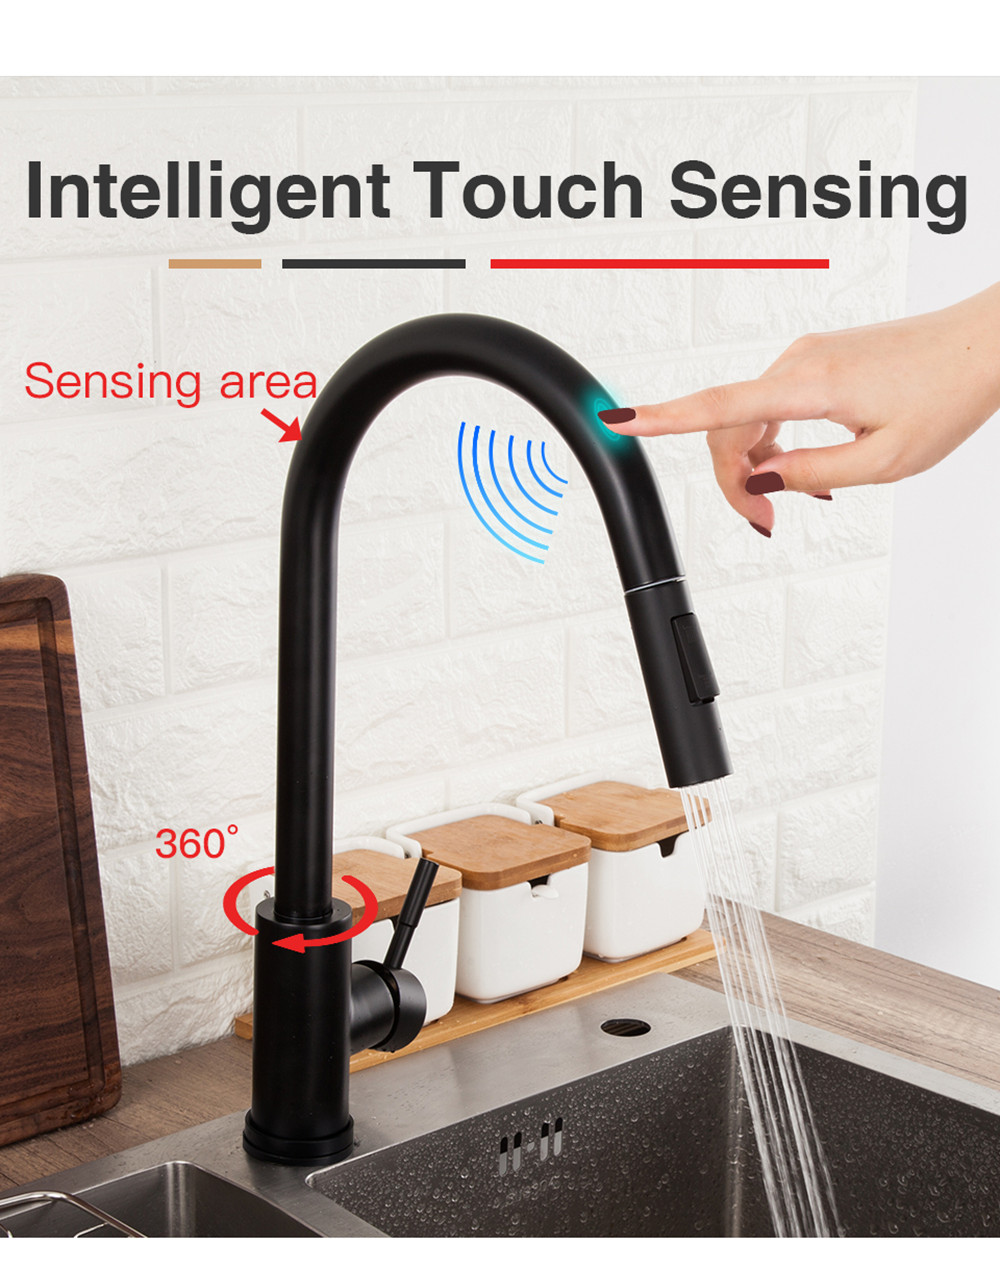 Matte Black Stainless Steel Kitchen Sink Faucets Mixer Smart Touch Sensor Pull Out Hot Cold Water Mixer Tap Crane